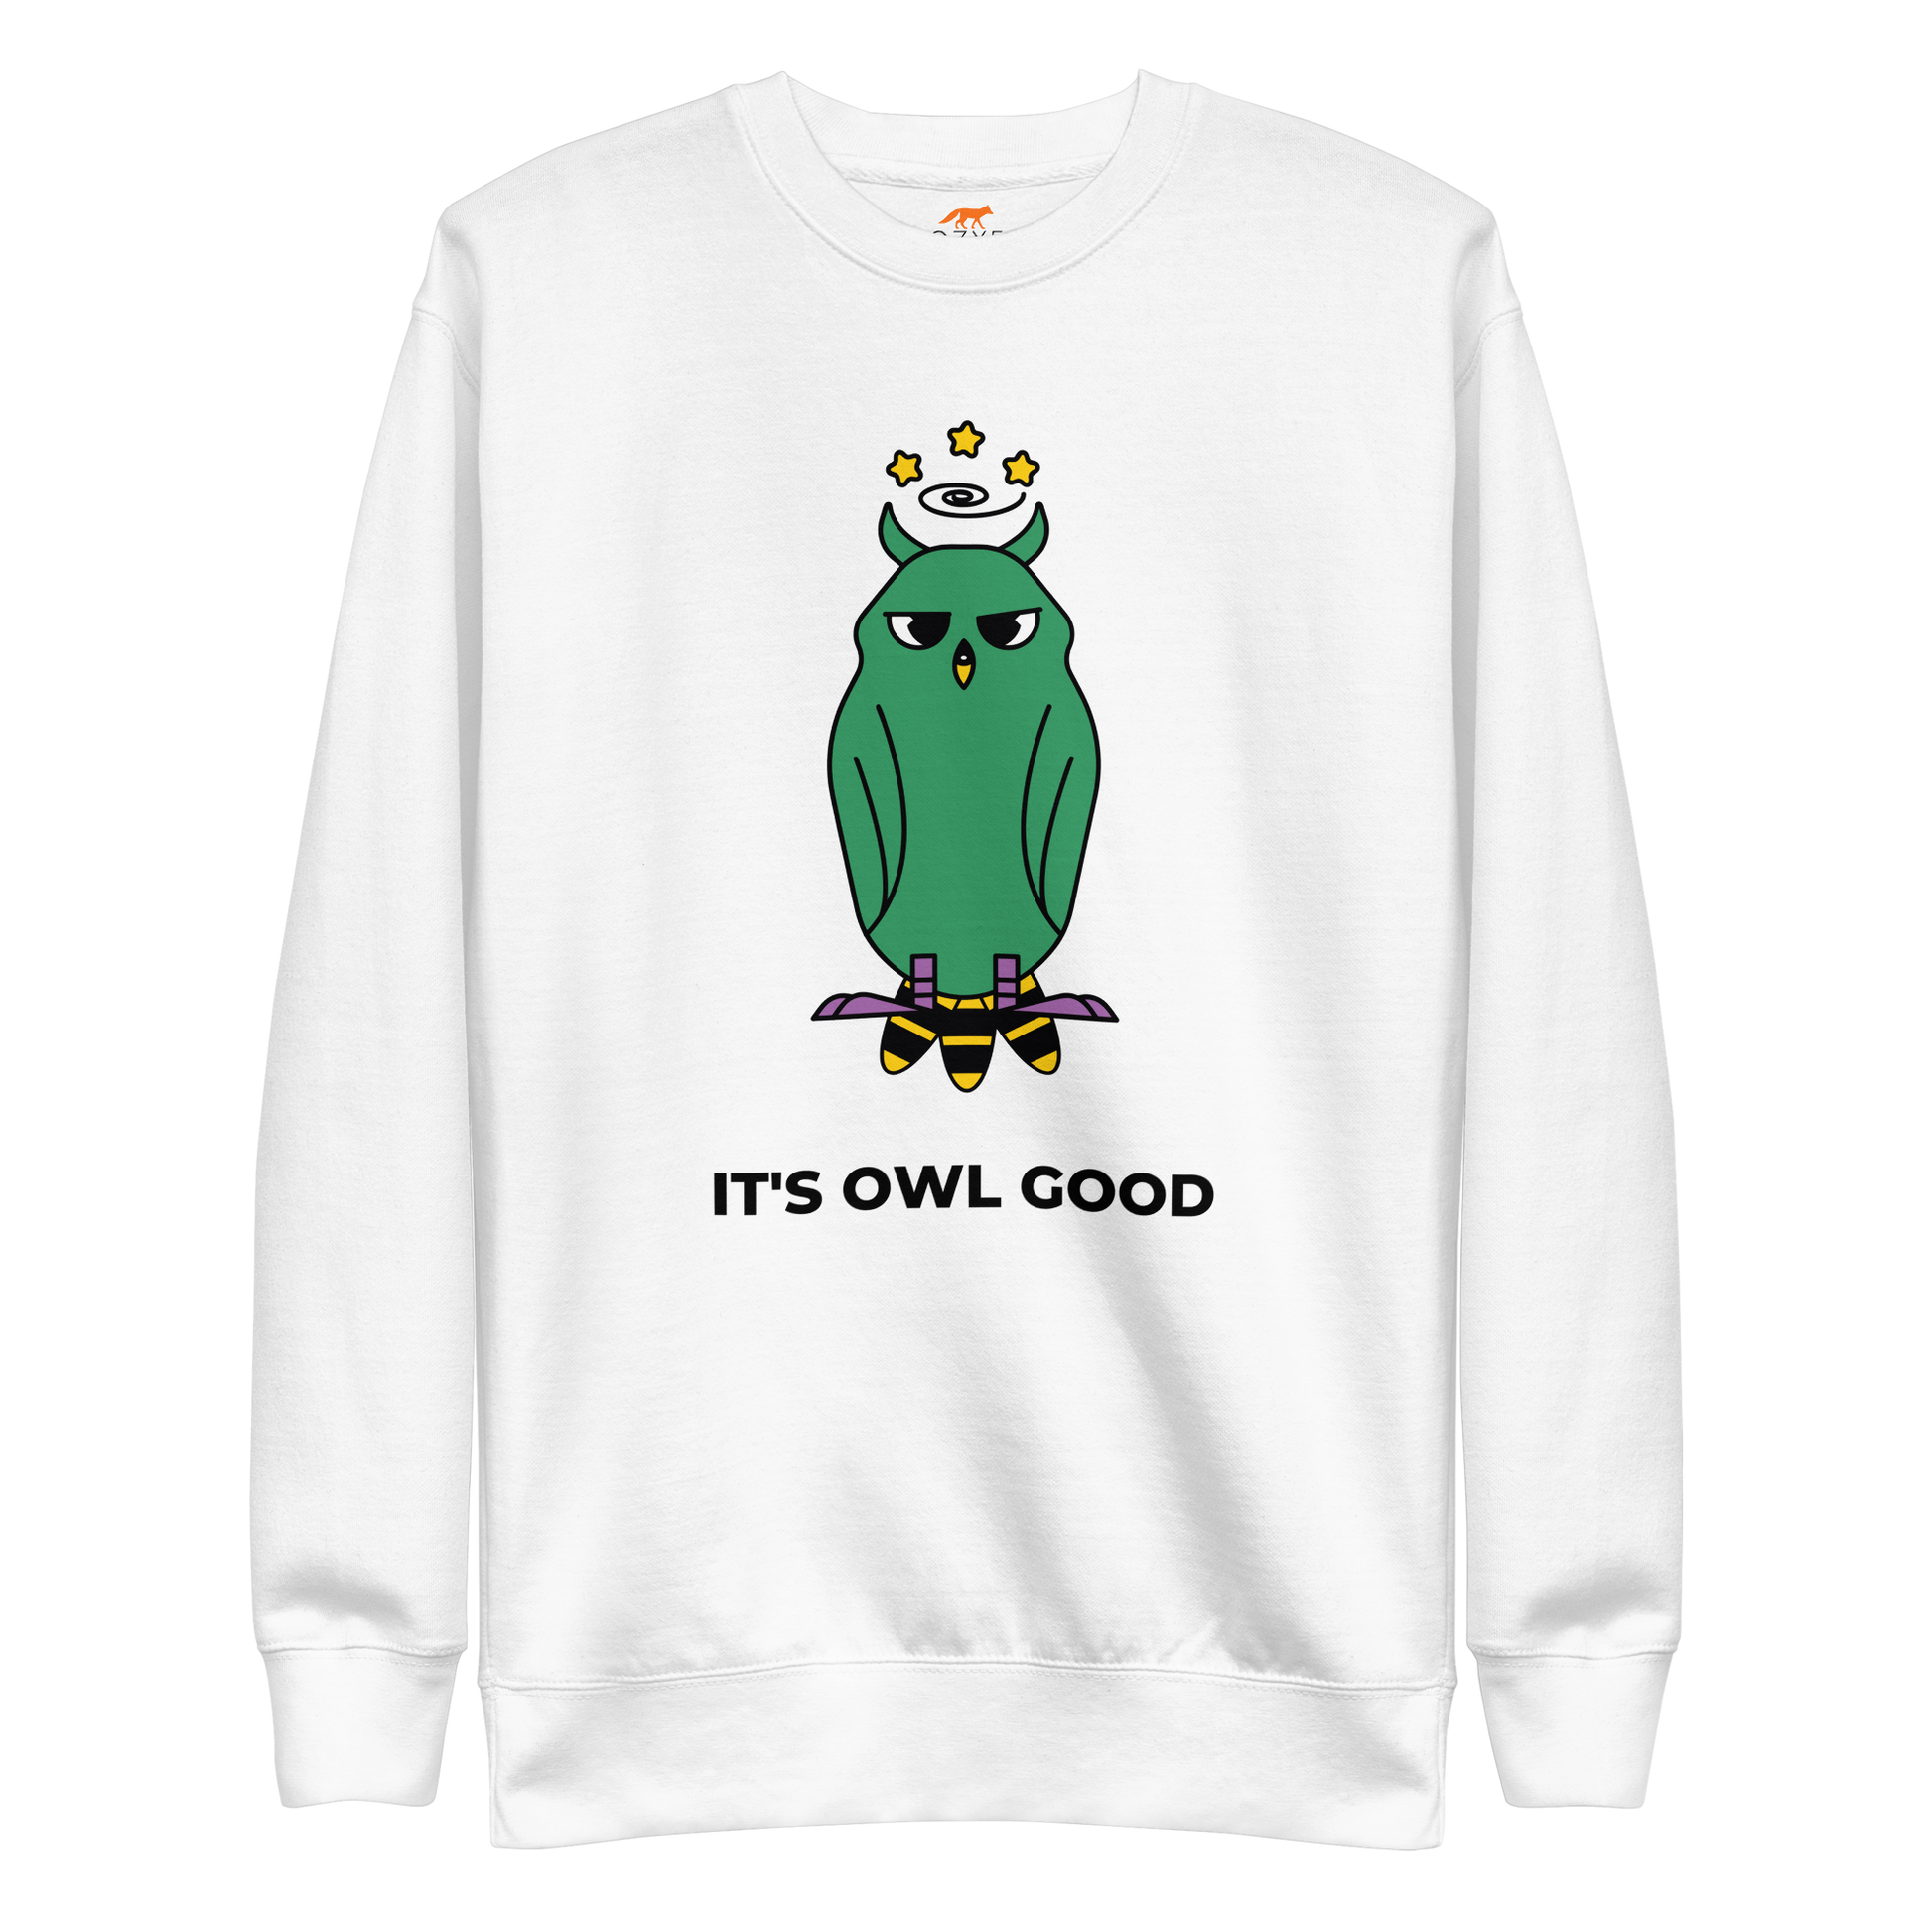 White Premium Owl Sweatshirt featuring a hootin' cool It's Owl Good graphic on the chest - Funny Graphic Owl Sweatshirts - Boozy Fox